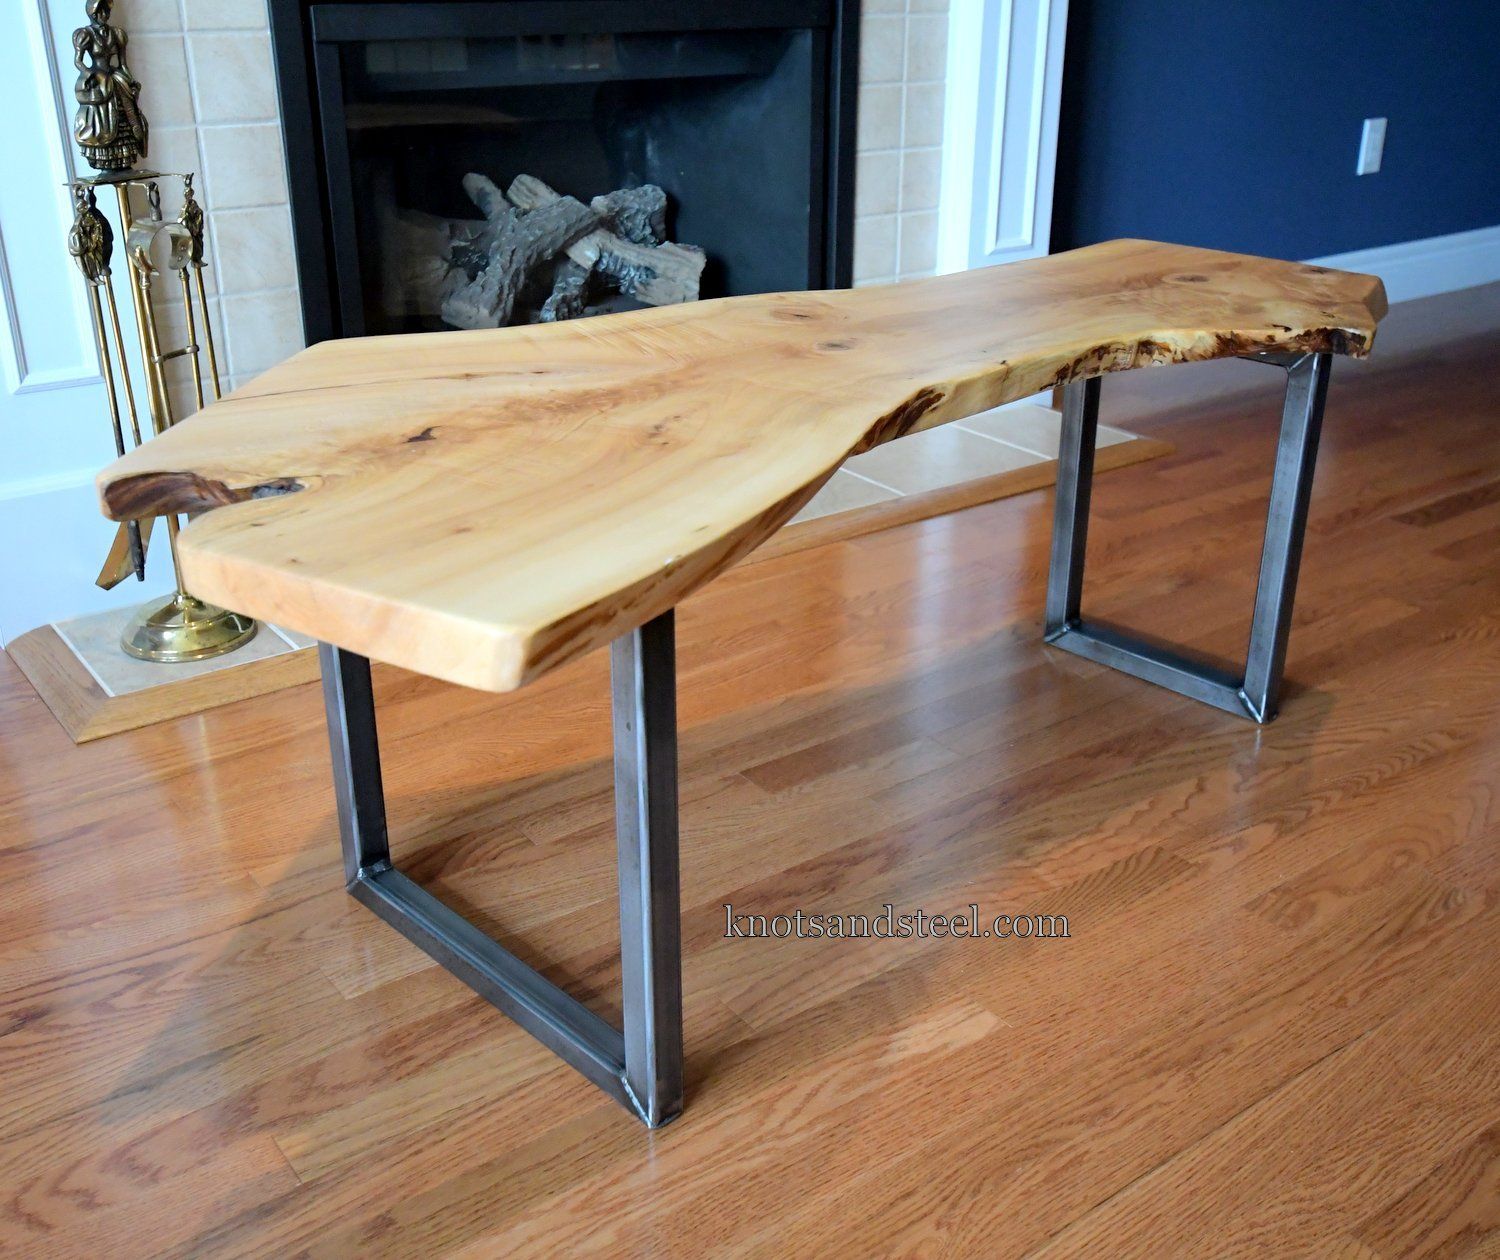 Live edge Maple coffee table with a metal base and legs